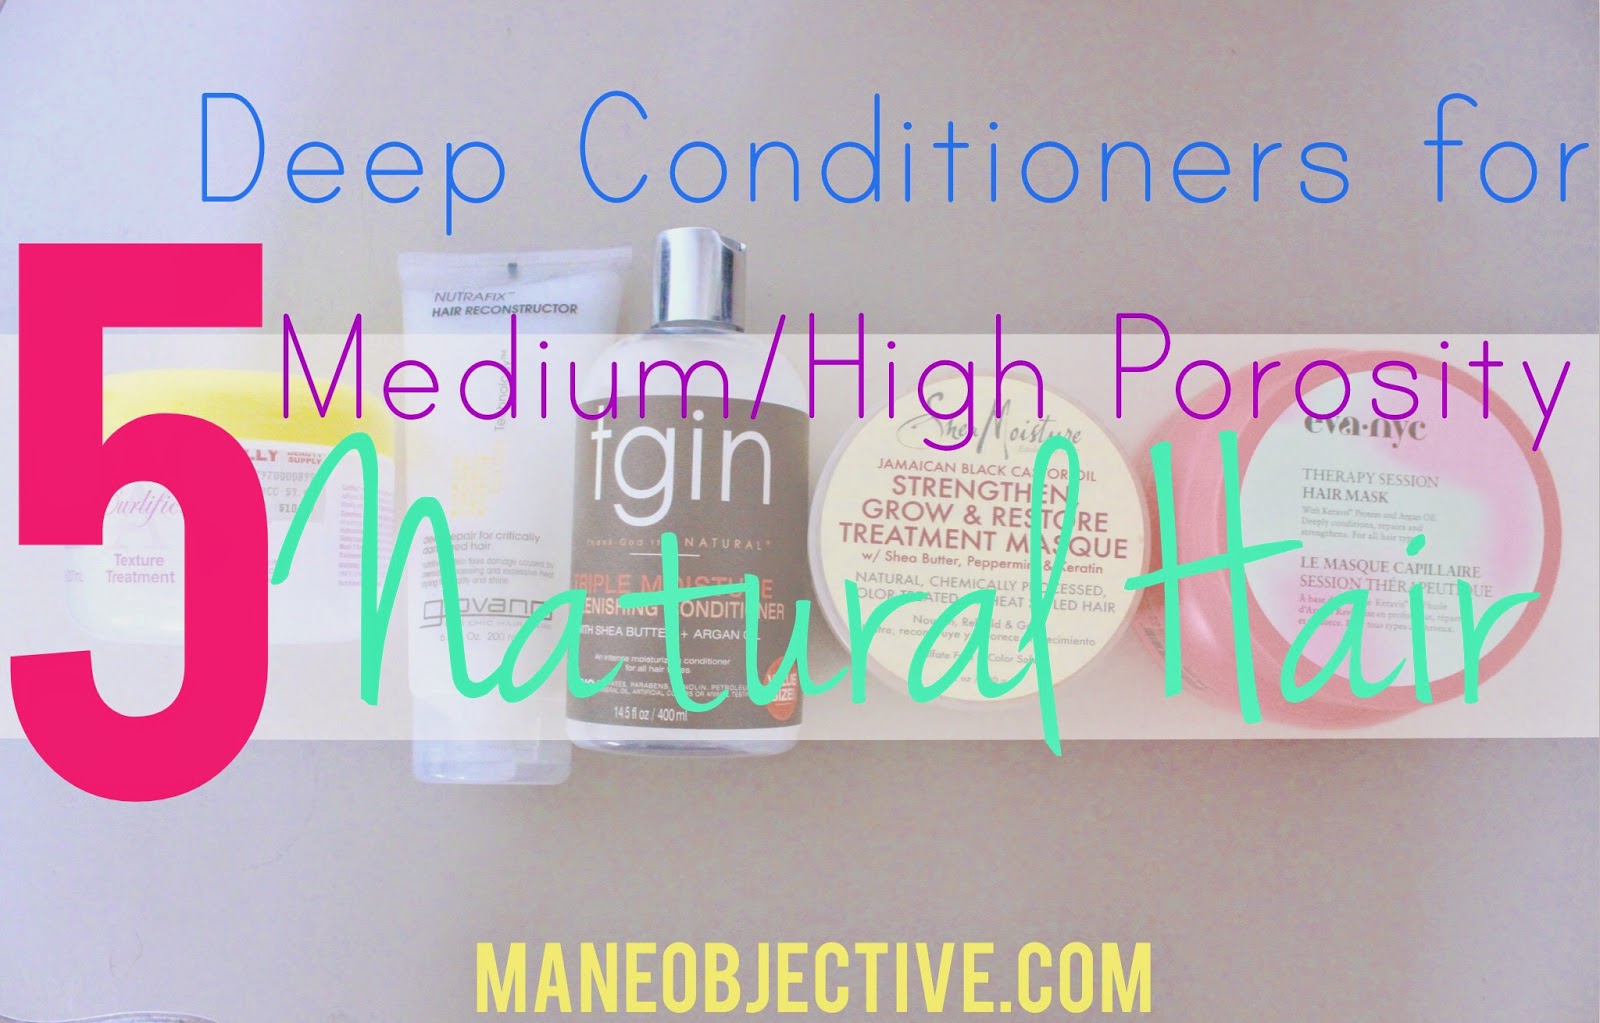 The 5 Best Deep Conditioners for Medium/High Porosity Natural Hair